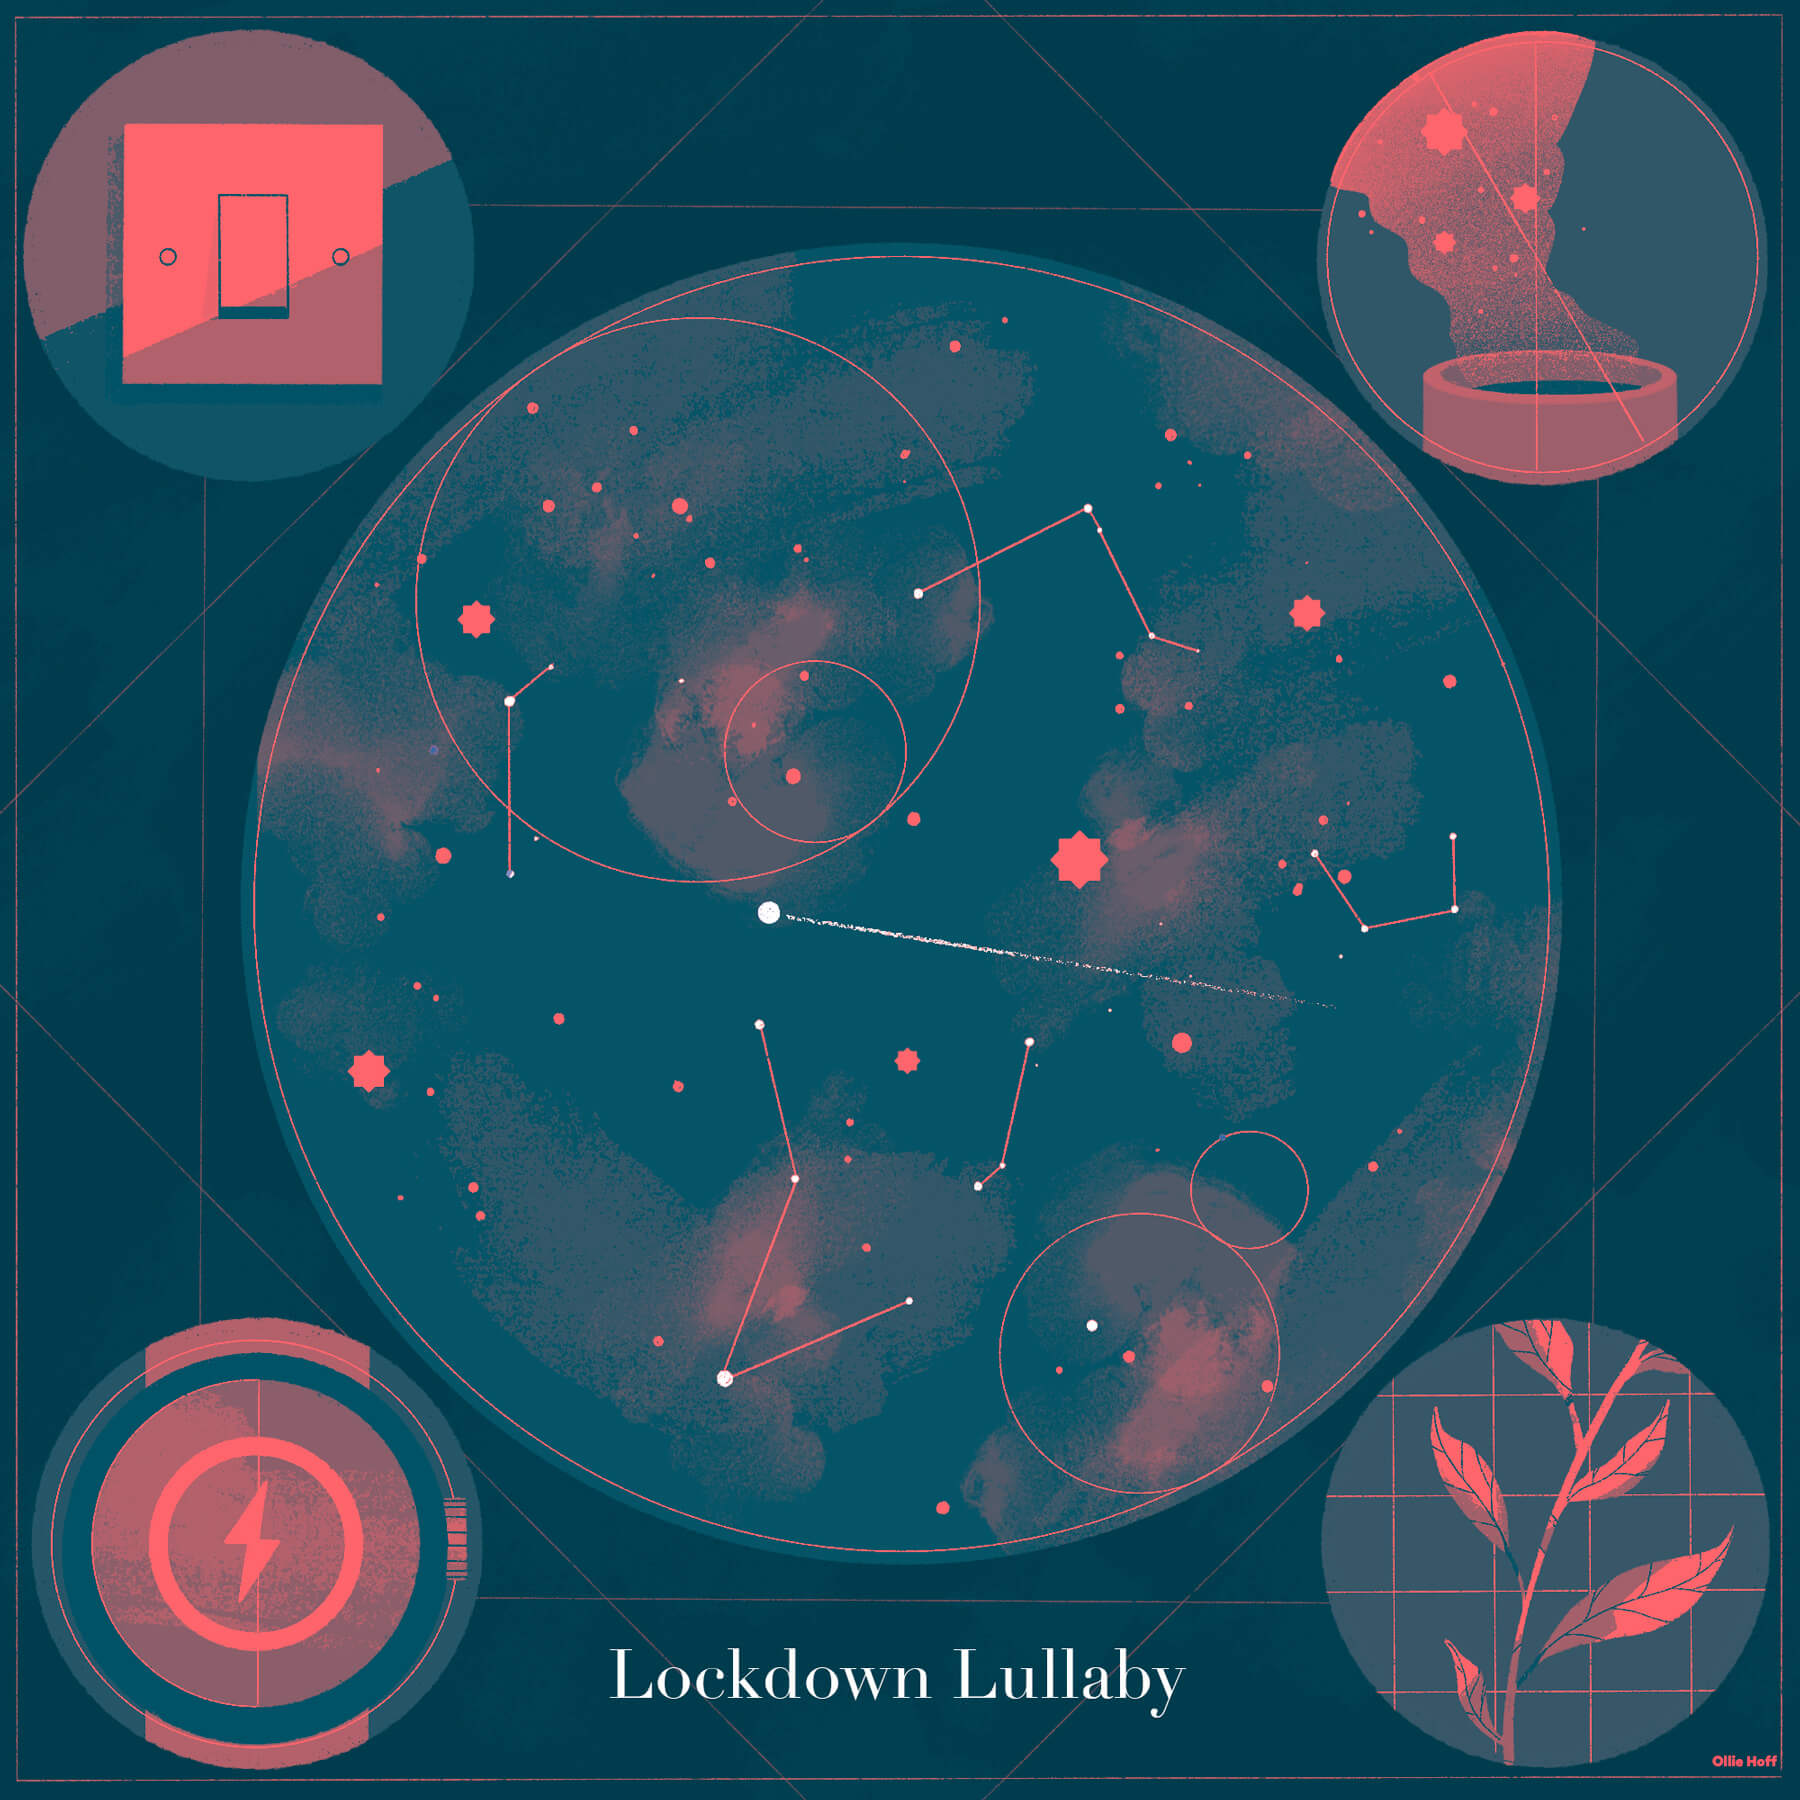 LockdownLullaby_final_small